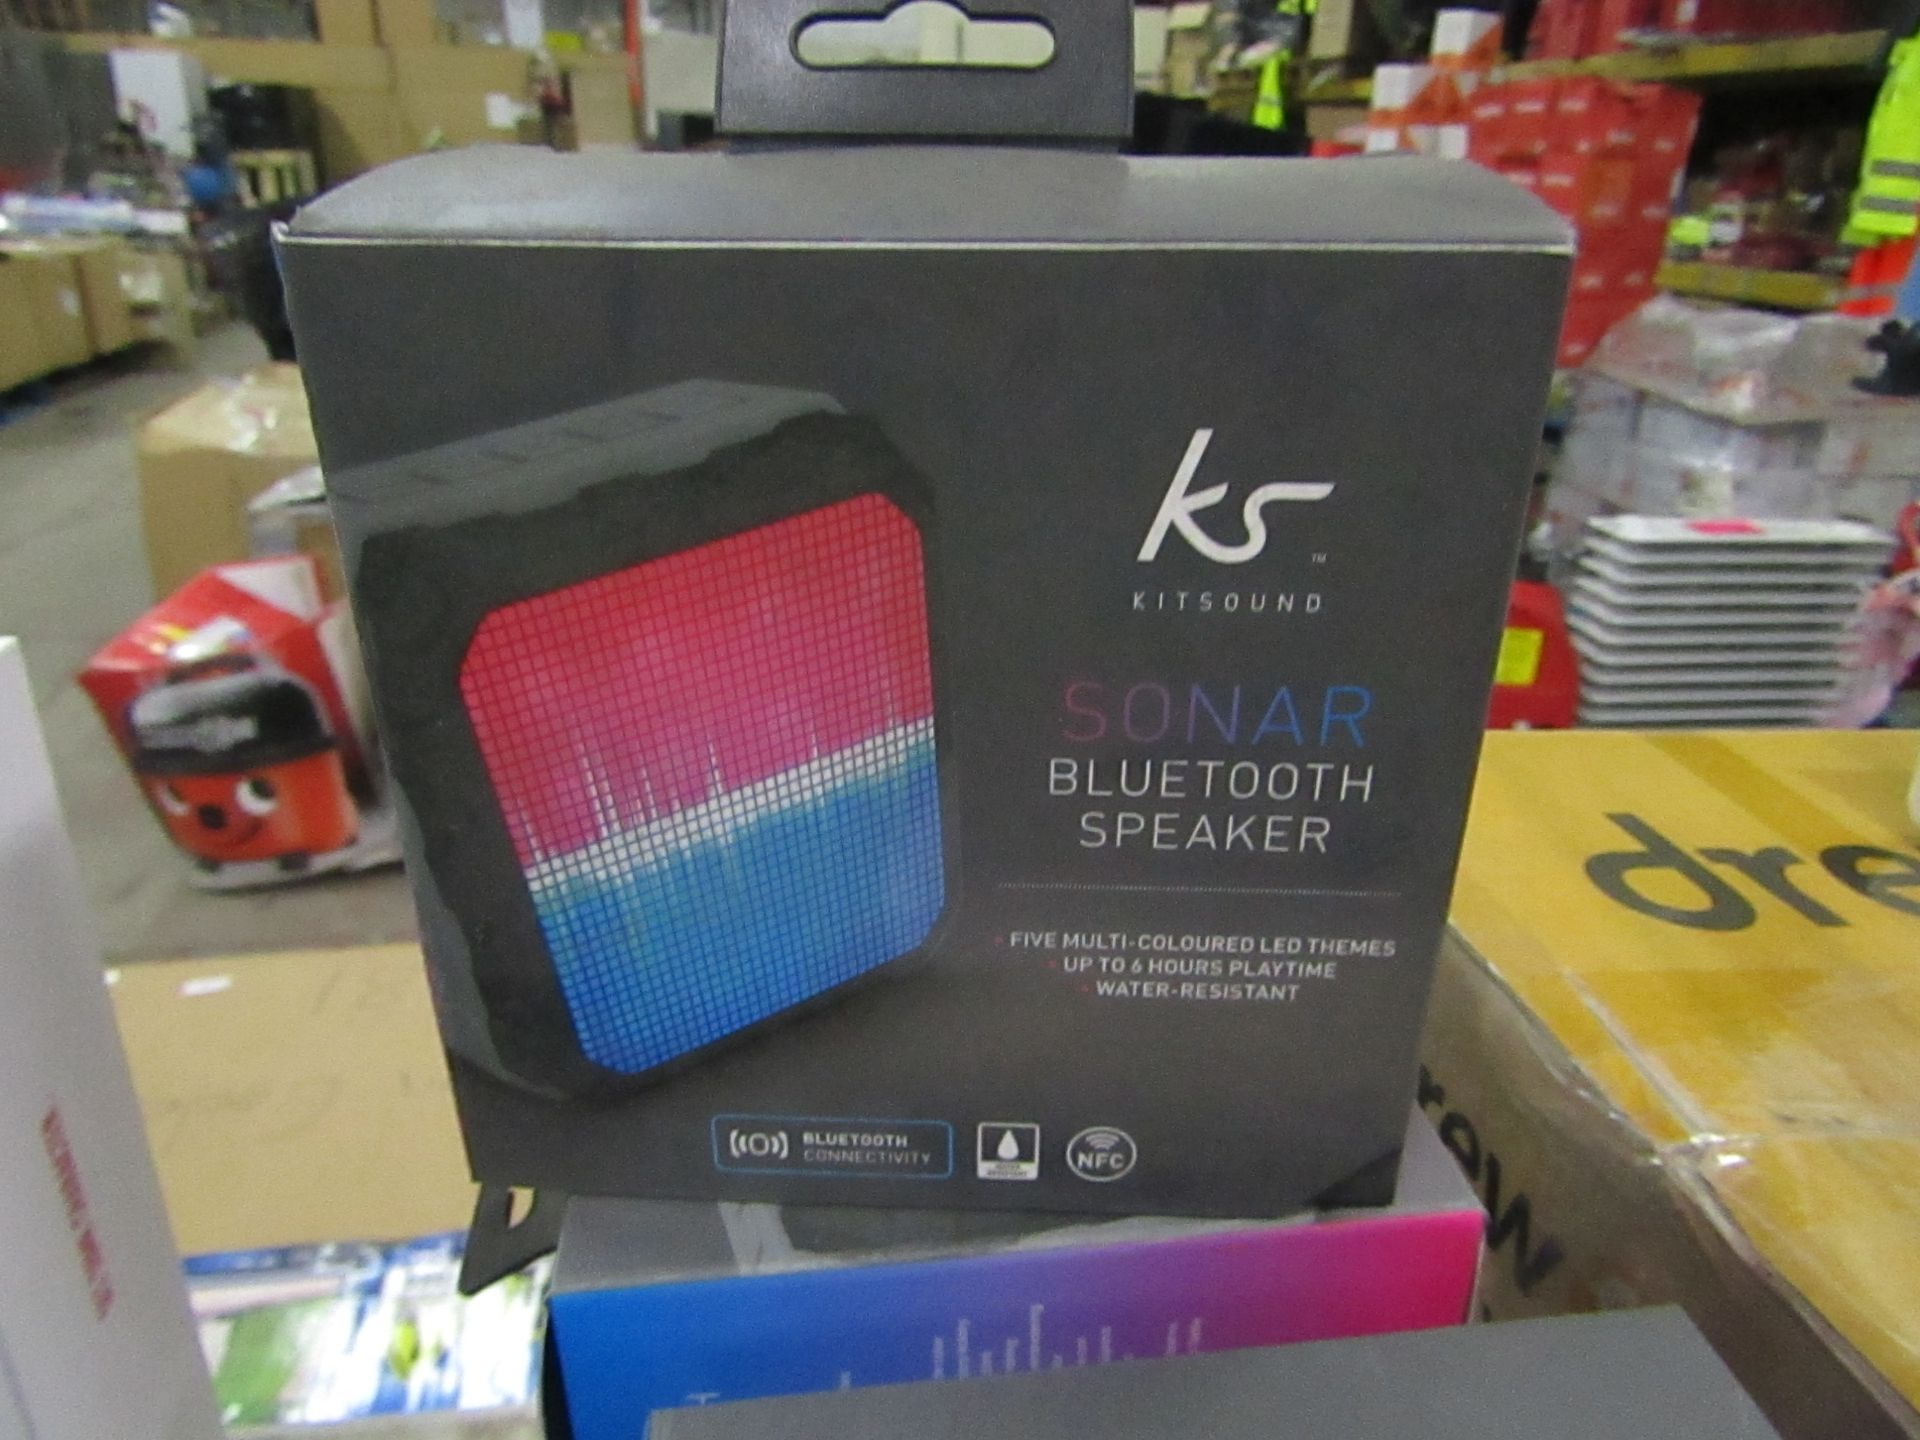 Kitsound Sonar Bluetooth speaker, new and boxed